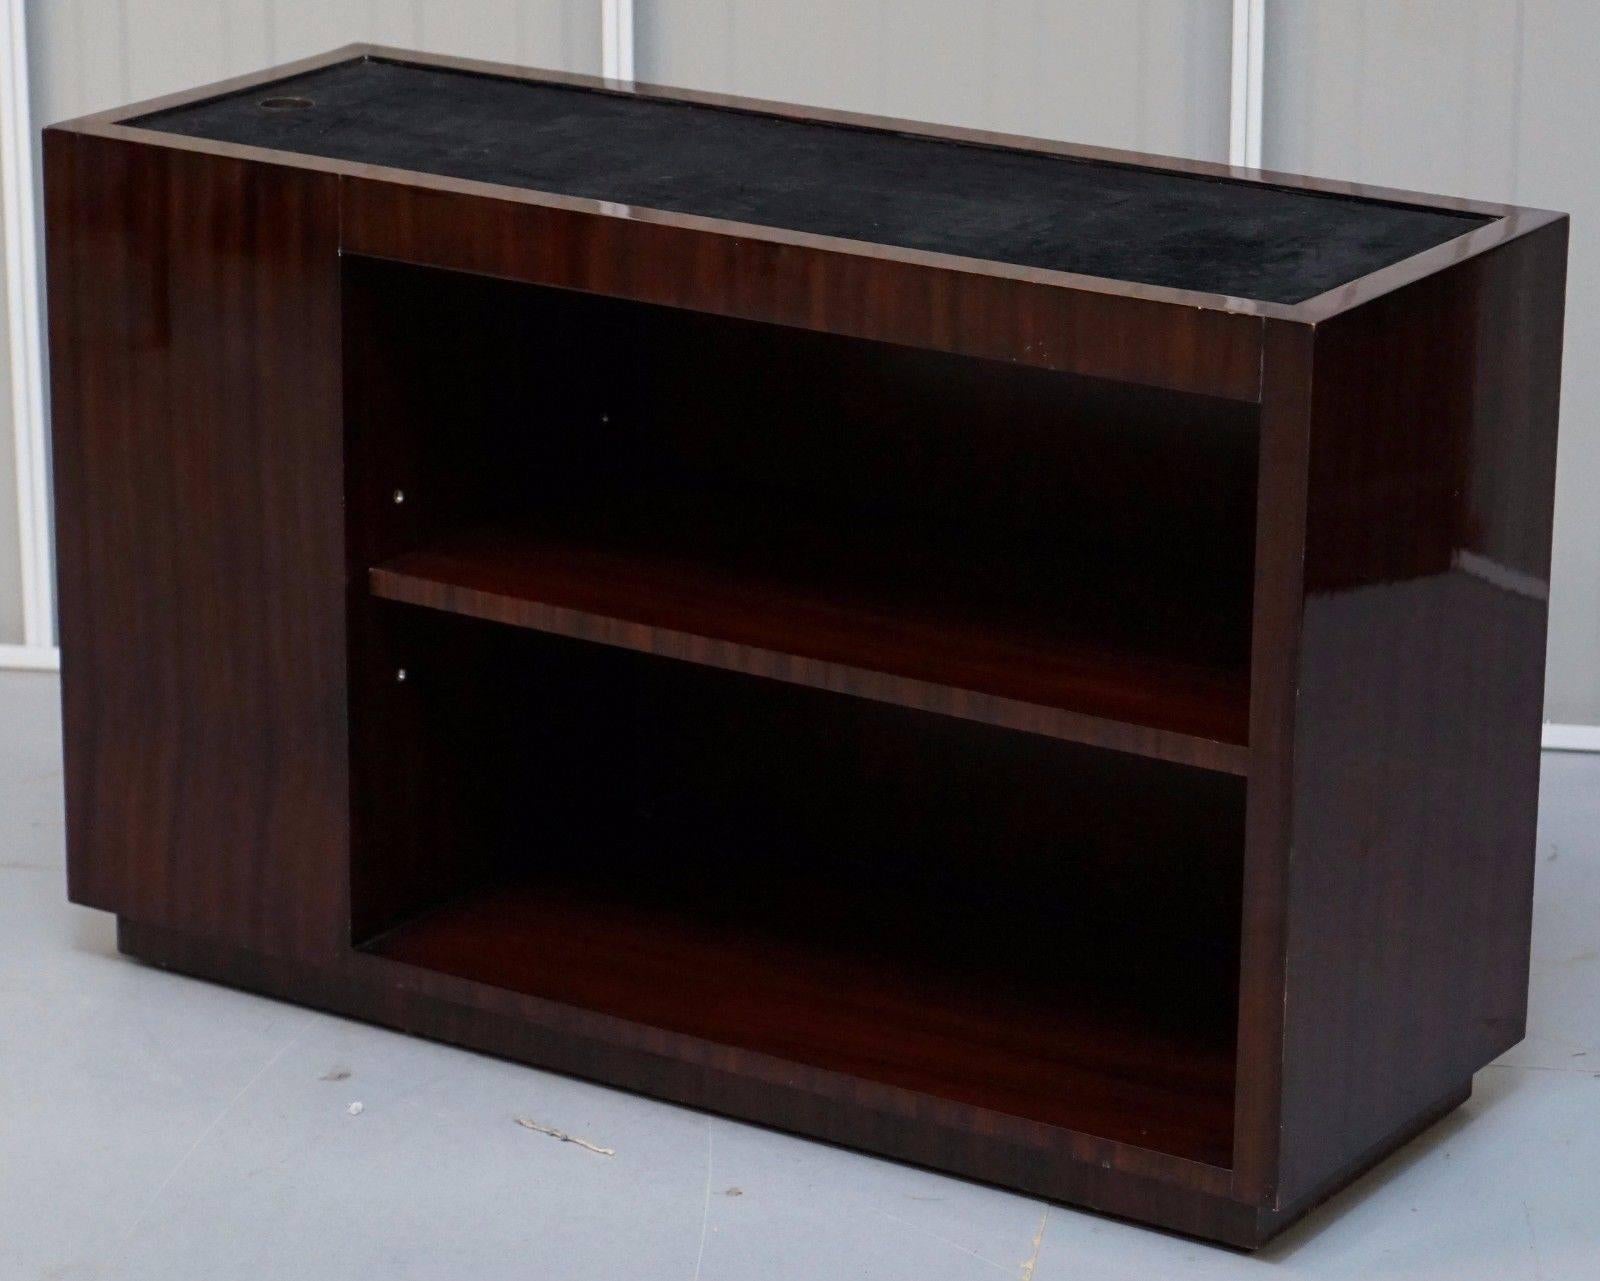 Hand-Crafted Ralph Lauren Wood and Black Velvet Media Television Stand Cabinet